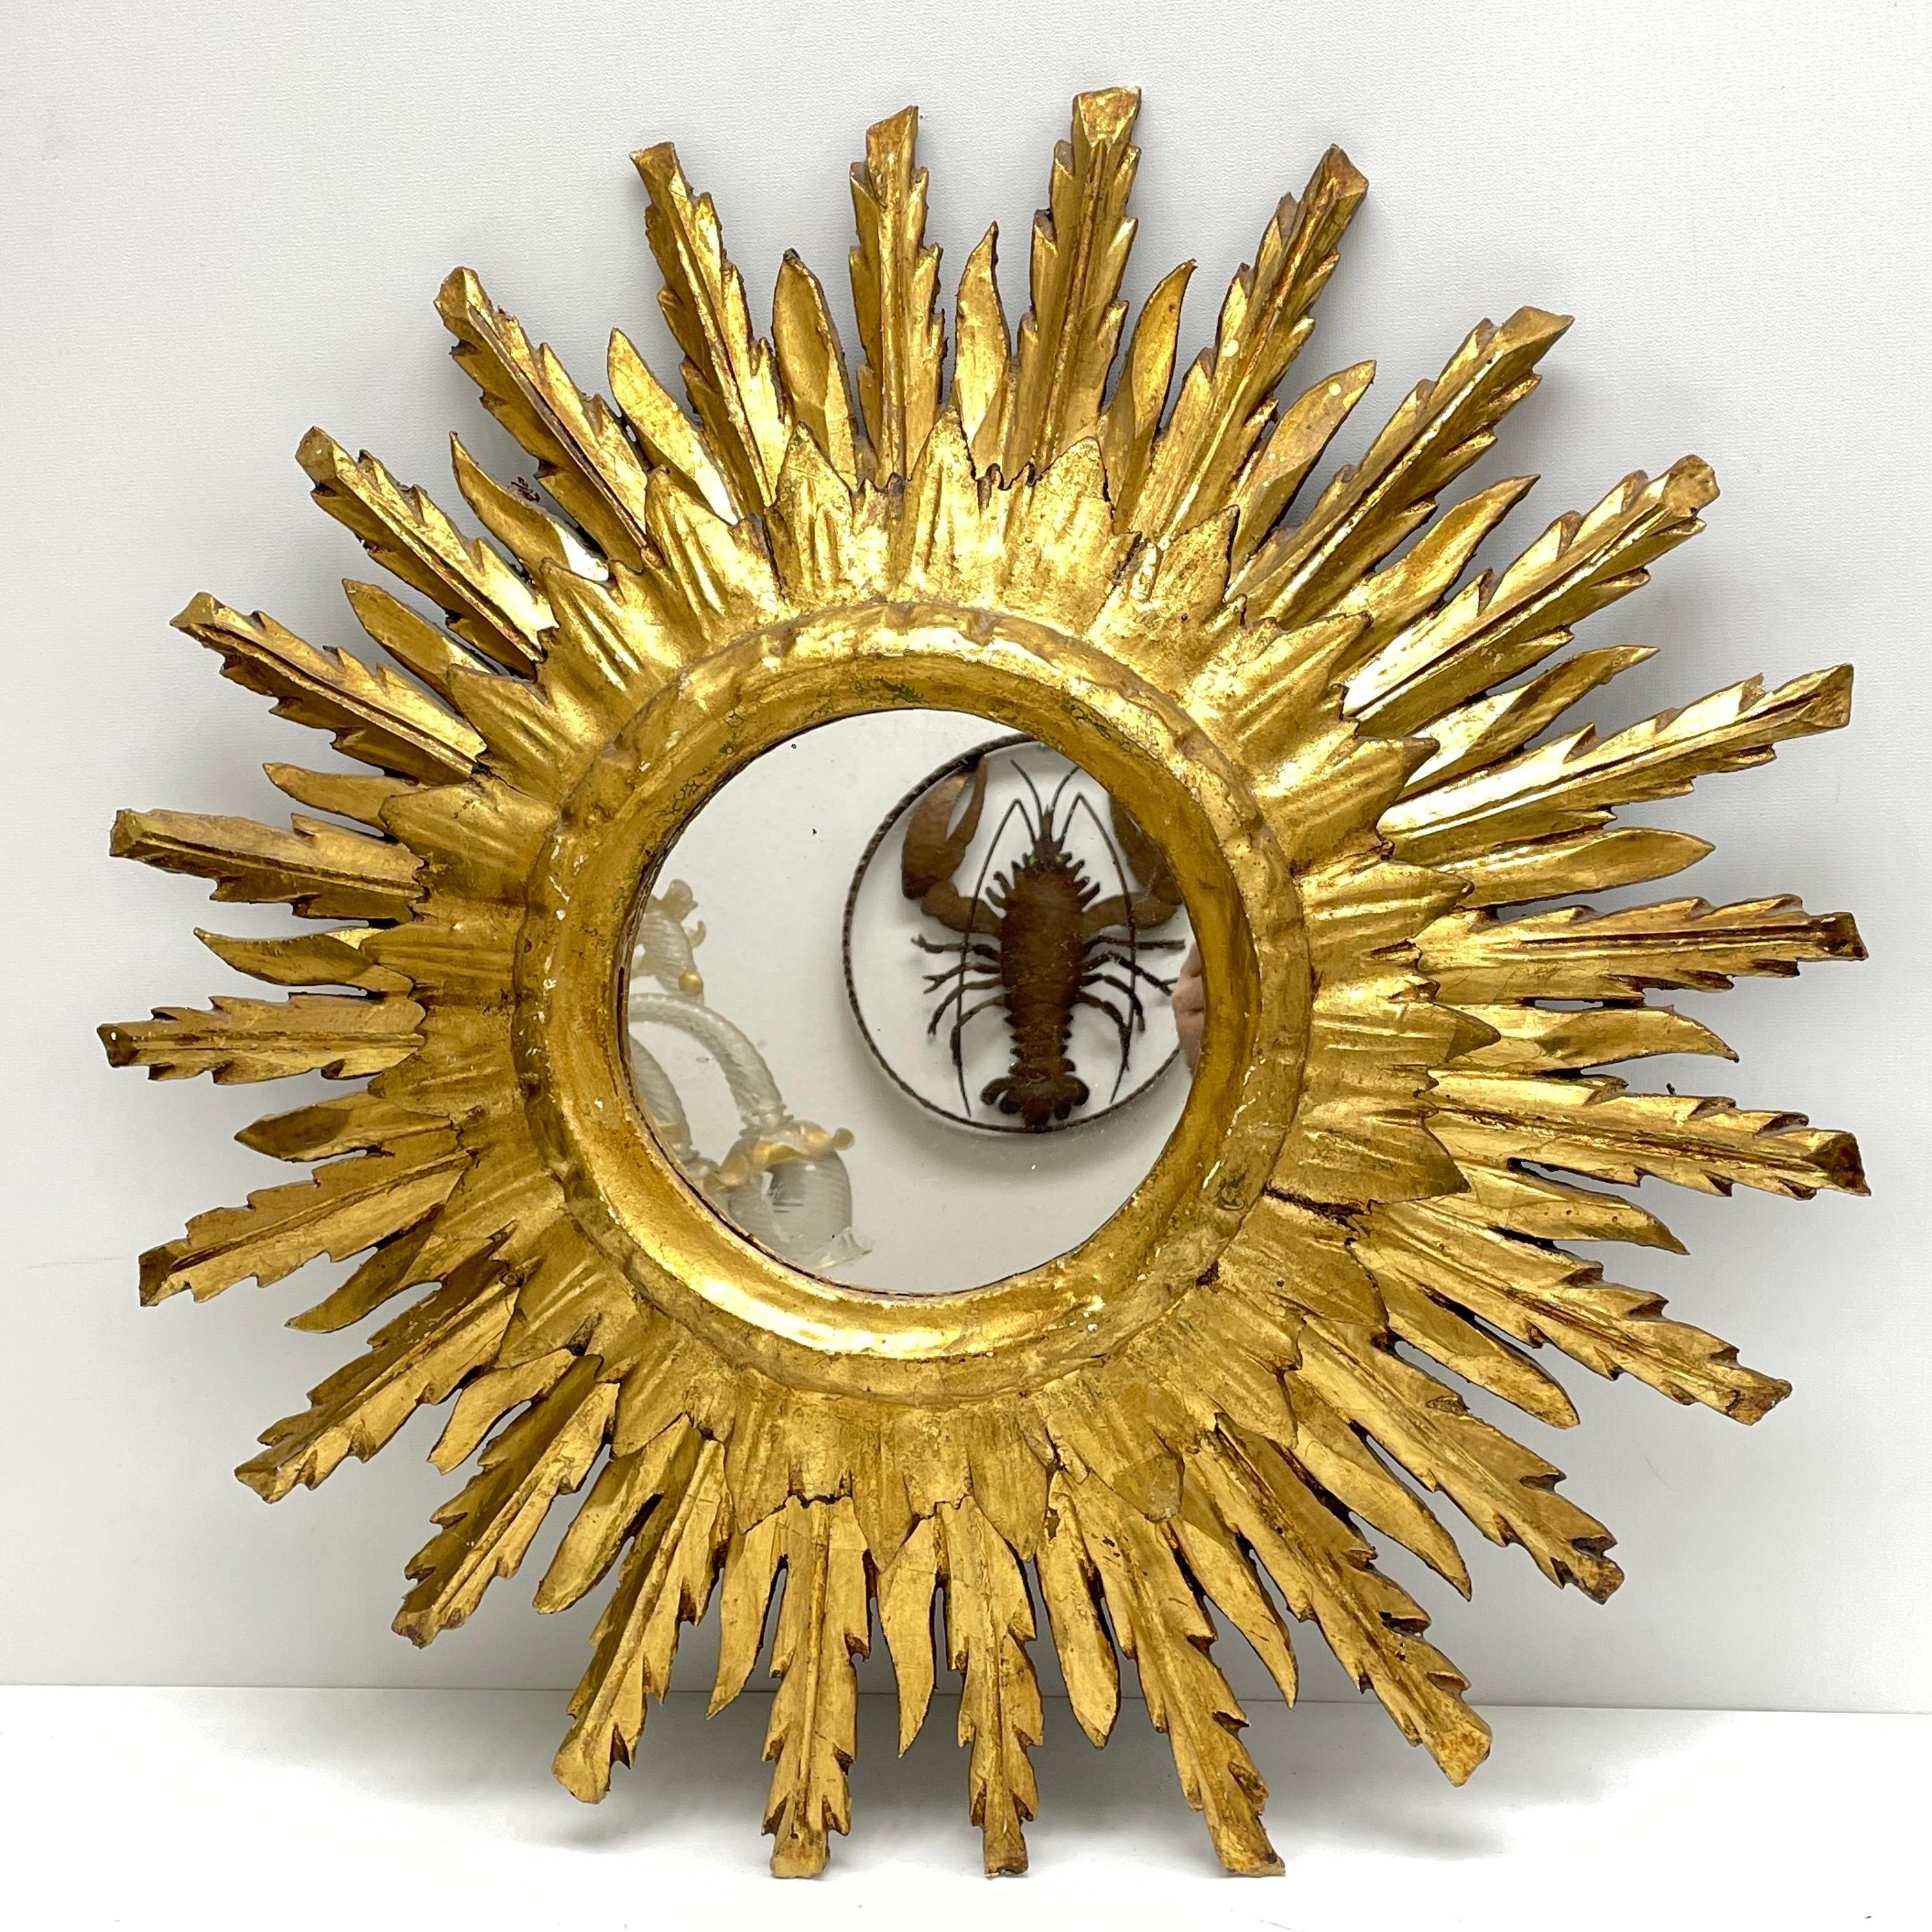 A gorgeous sunburst or starburst mirror. Made of gilded wood. It measures approximate: 23